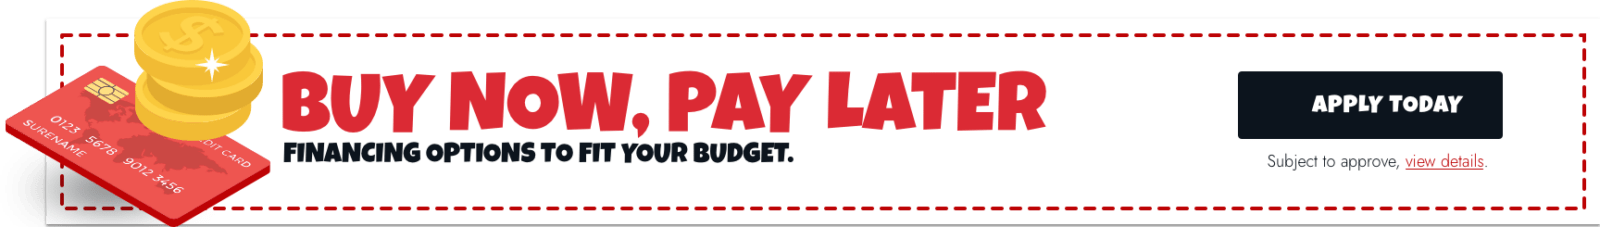 Buy now pay later | Big Bob's Flooring Outlet Birmingham